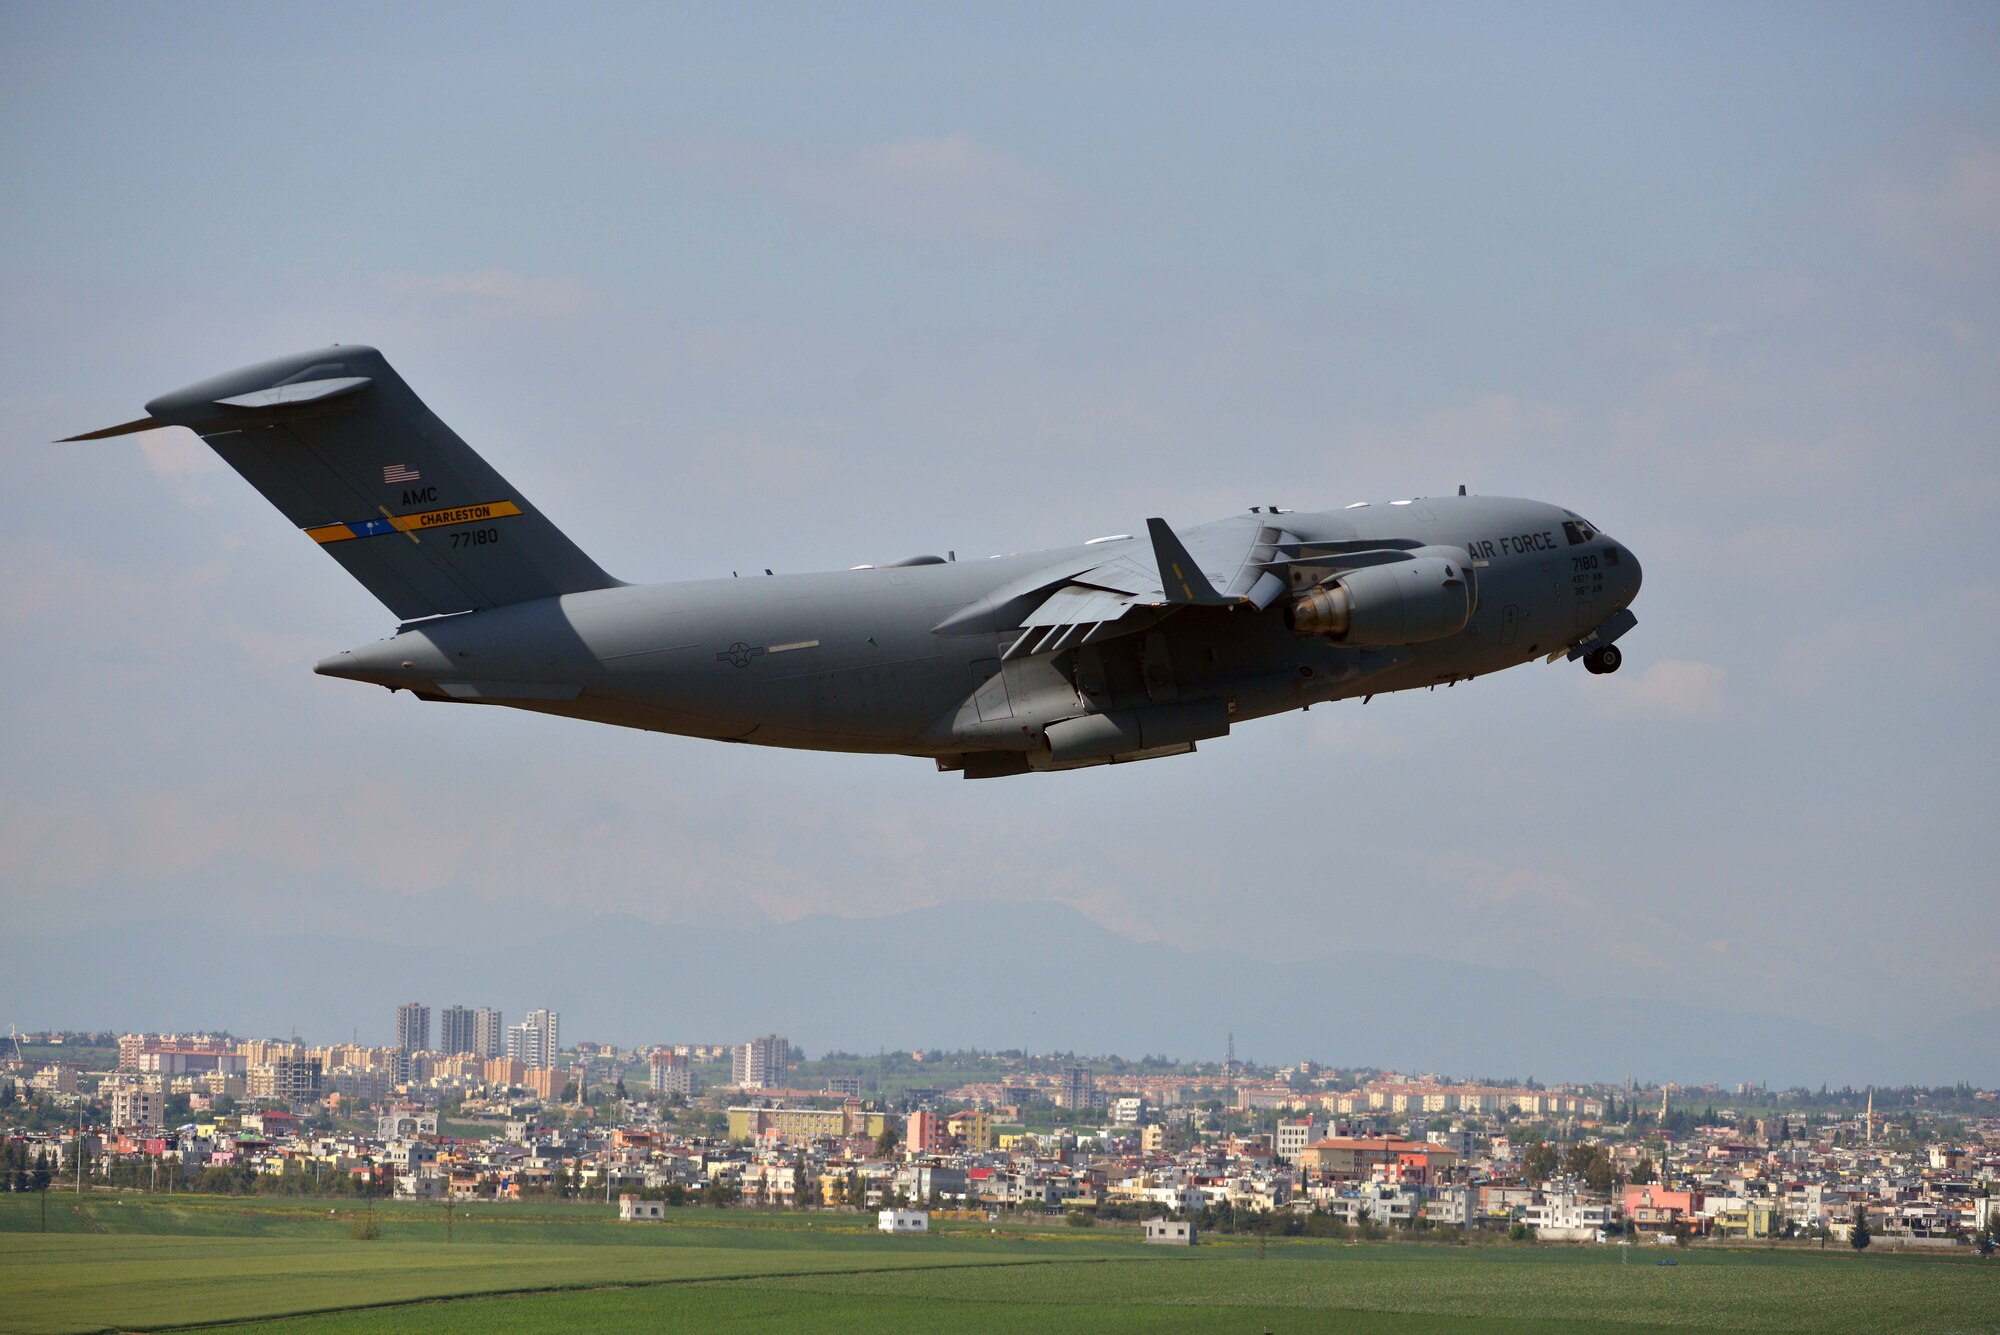 A C-17 Globemaster III takes off from Incirlik Air Base, Turkey, March 30, 2016. On March 29, 2016, the Secretary of Defense, in coordination with the Secretary of State, ordered the departure of all Department of Defense dependents assigned to Incirlik Air Base. (U.S. Air Force photo by Senior Airman John Nieves Camacho/Released)